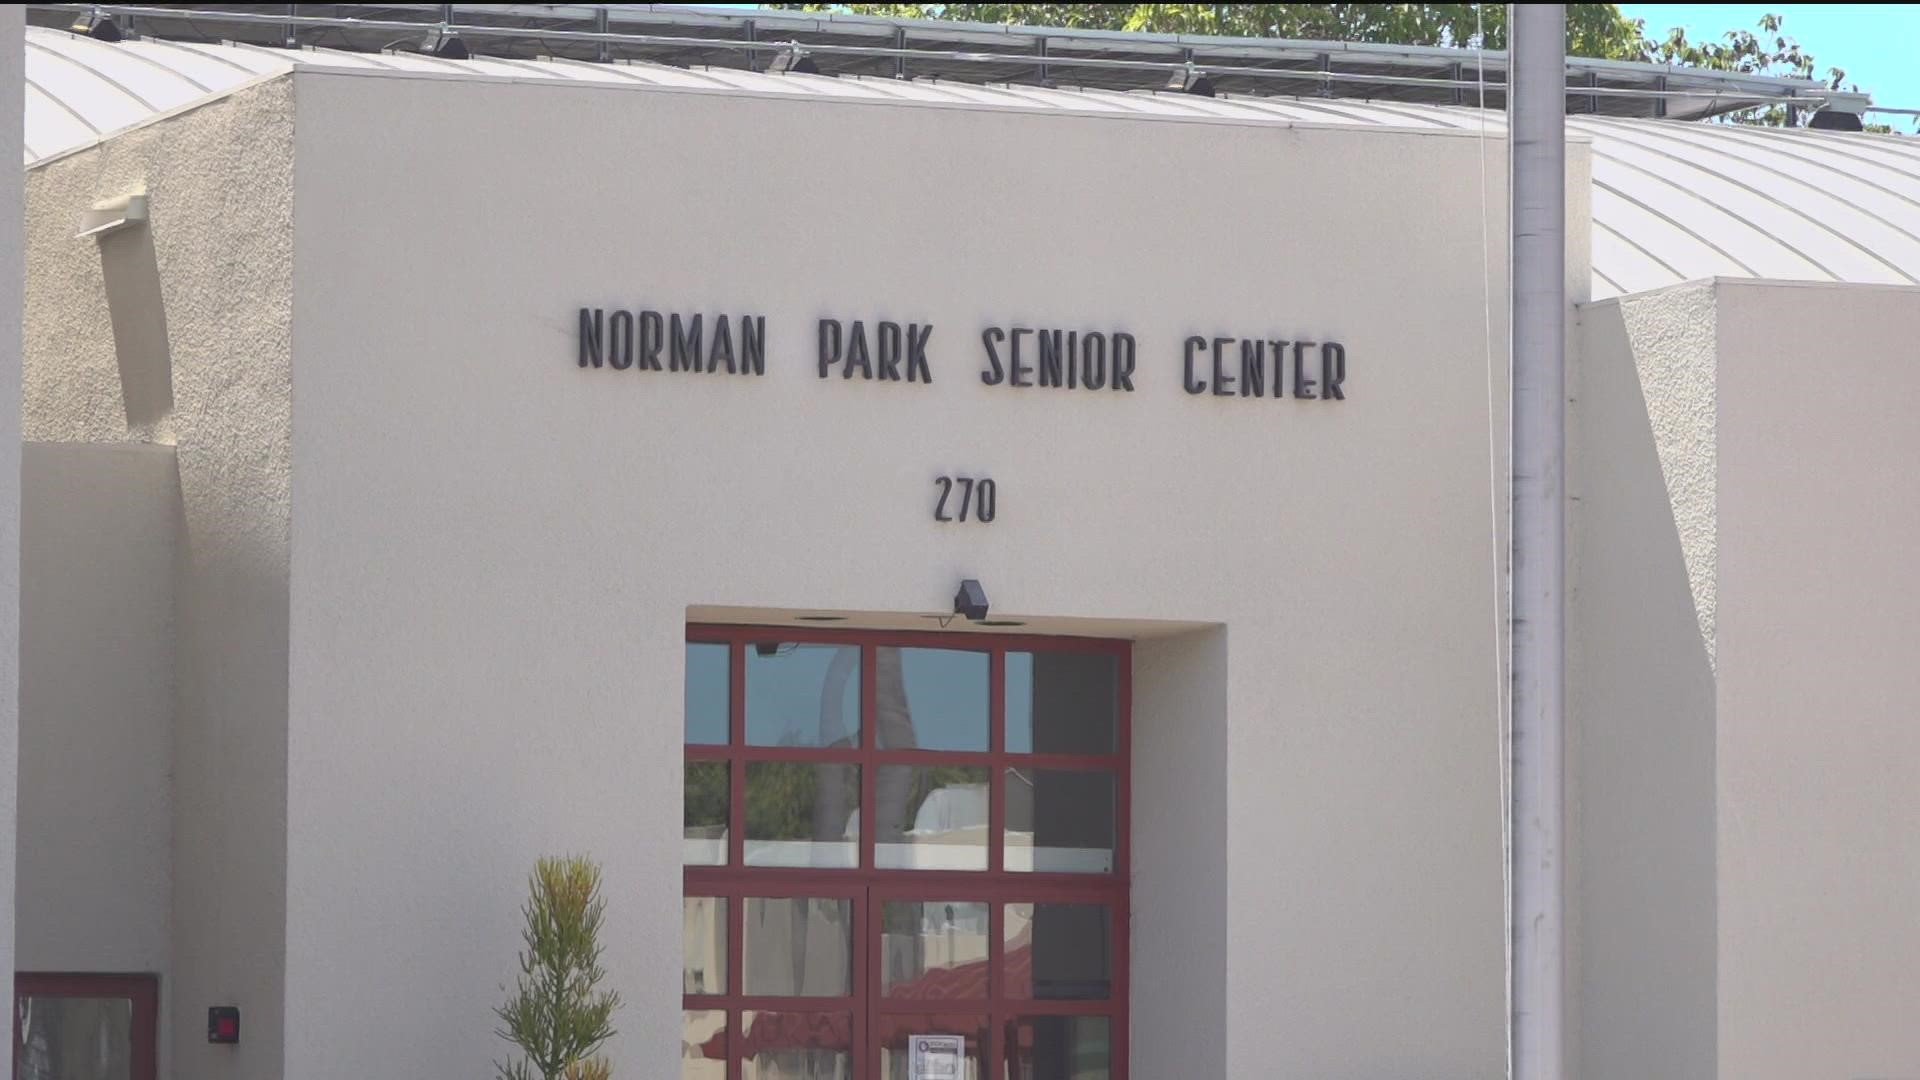 The Norman Park Senior Center and the Chula Vista Library are both serving as cooling zones for people in the City of Chula Vista.